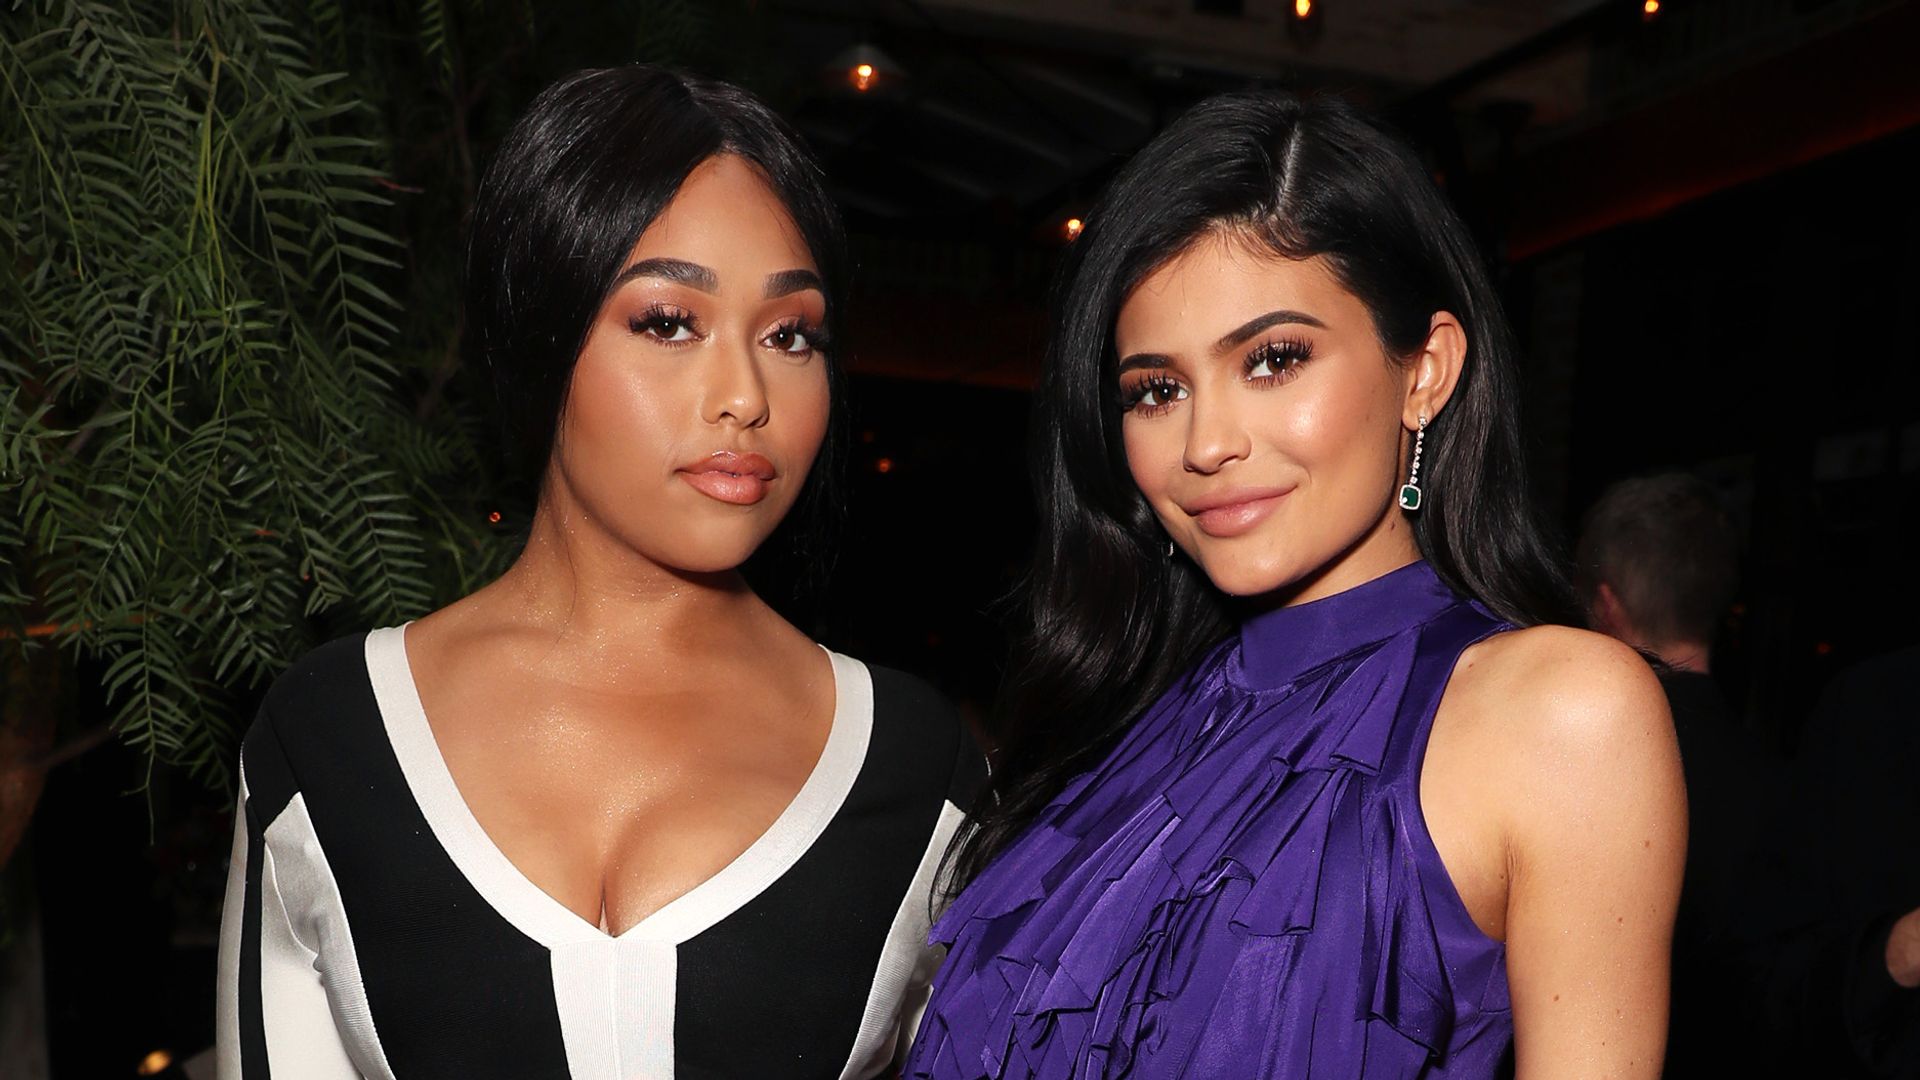 Jordyn Woods and Kylie Jenner at the Marie Claire Image Maker Awards in Los Angeles - 10 Jan 2017